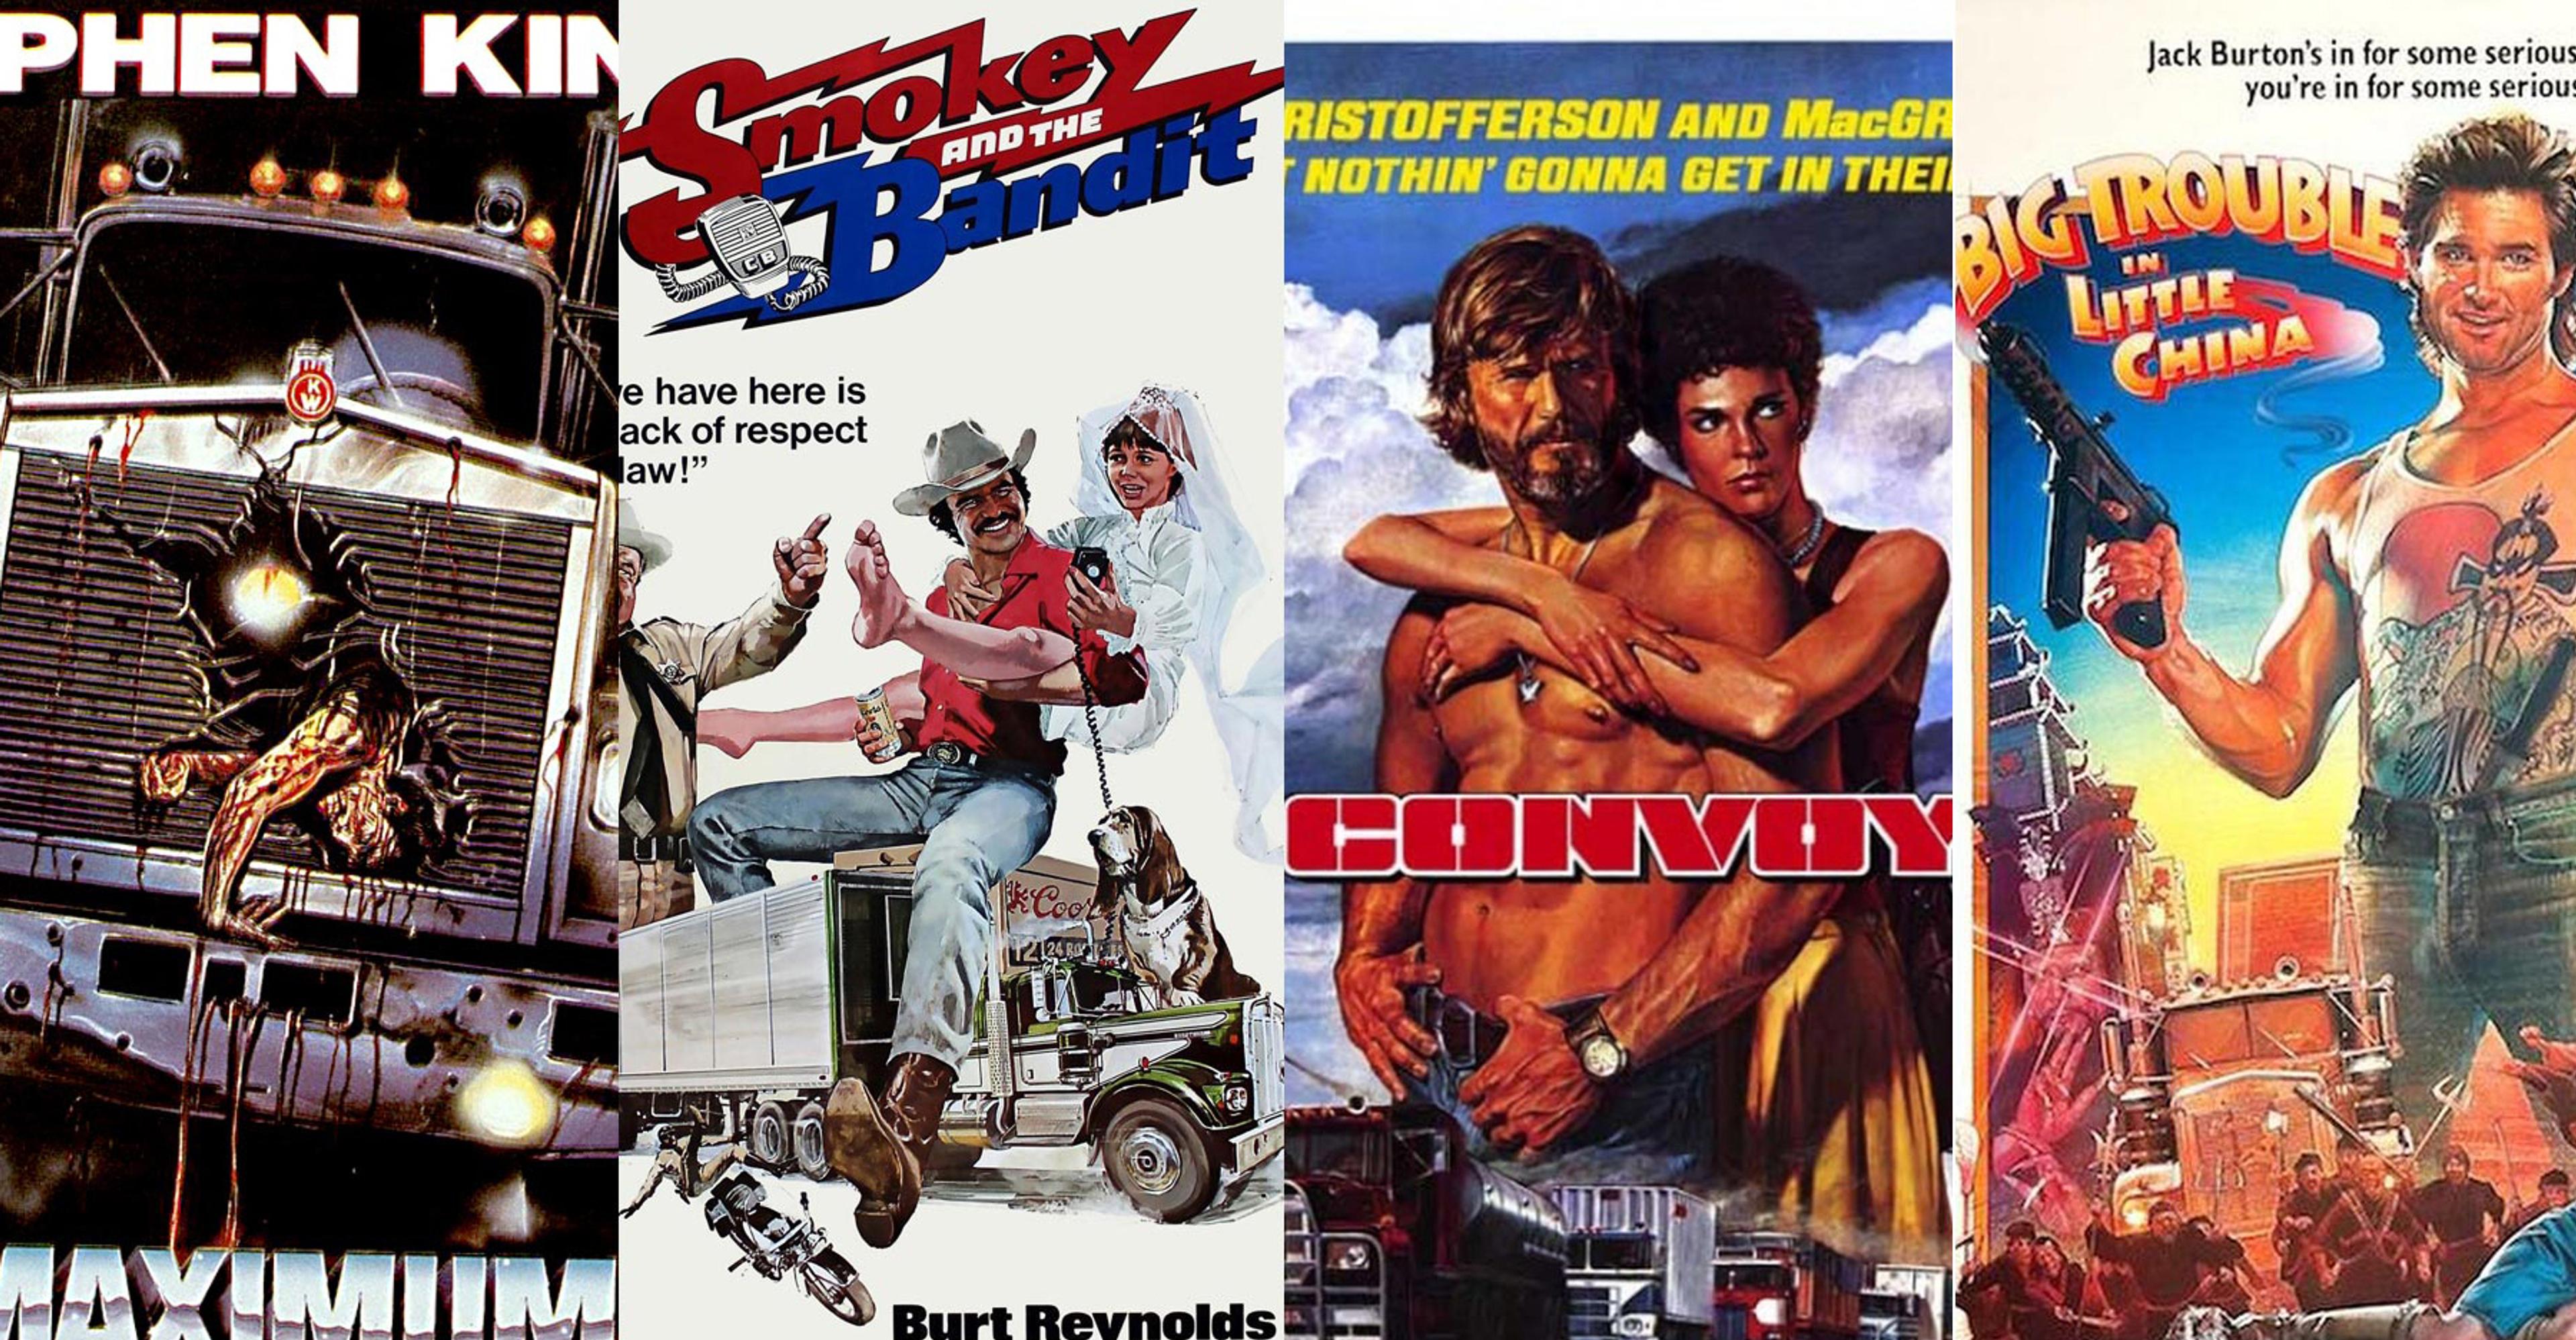 4 movie posted cropped together of Maximum Overdrive, Smokey and the Bandit, Convoy and Big Trouble in Little China.